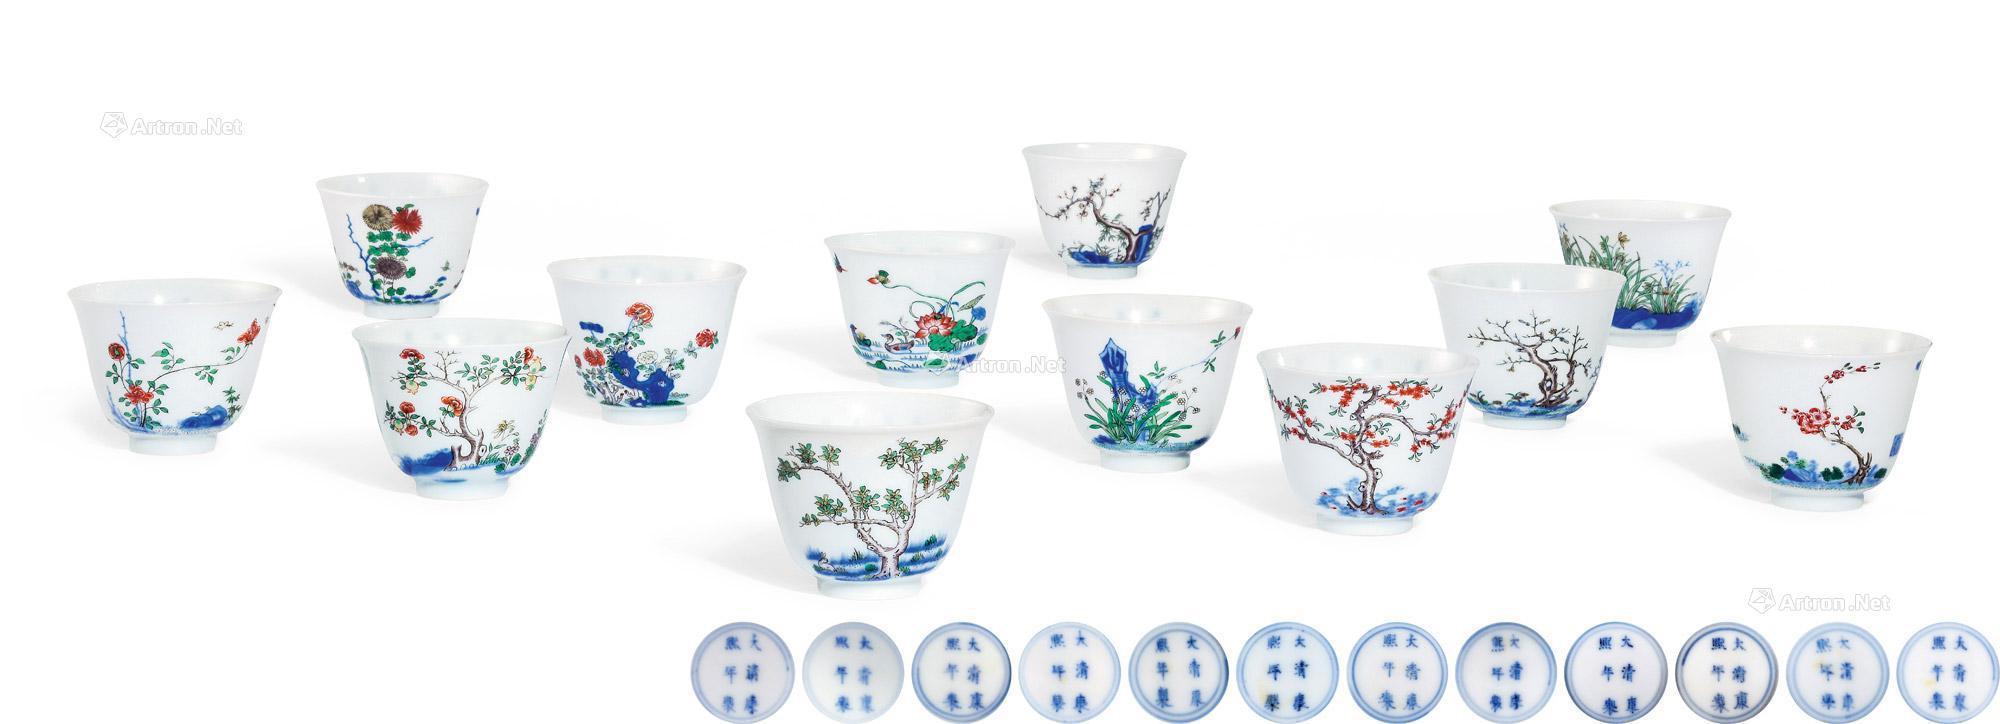 A SET OF TWELVE EXTREMELY RARE WUCAI‘MONTN’ CUPS